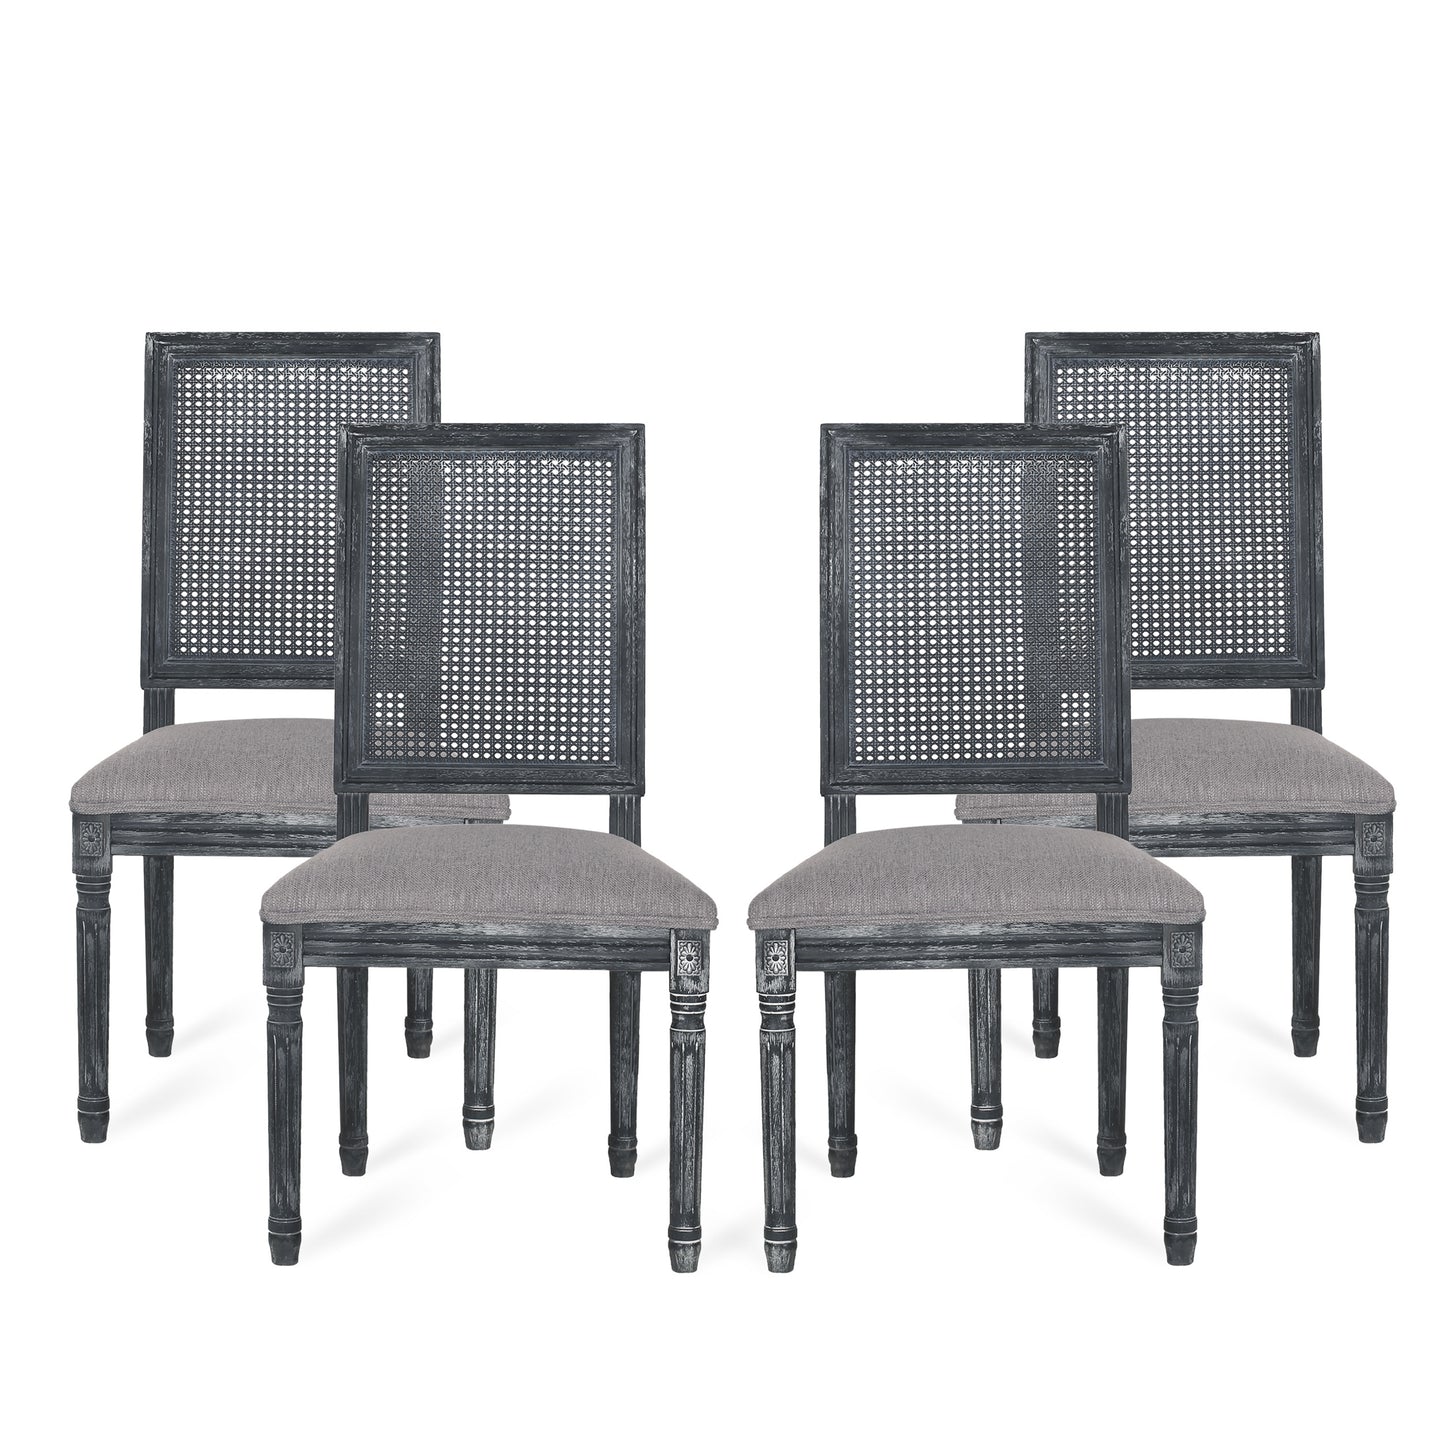 Brownell French Country Wood and Cane Upholstered Dining Chair, Set of 4